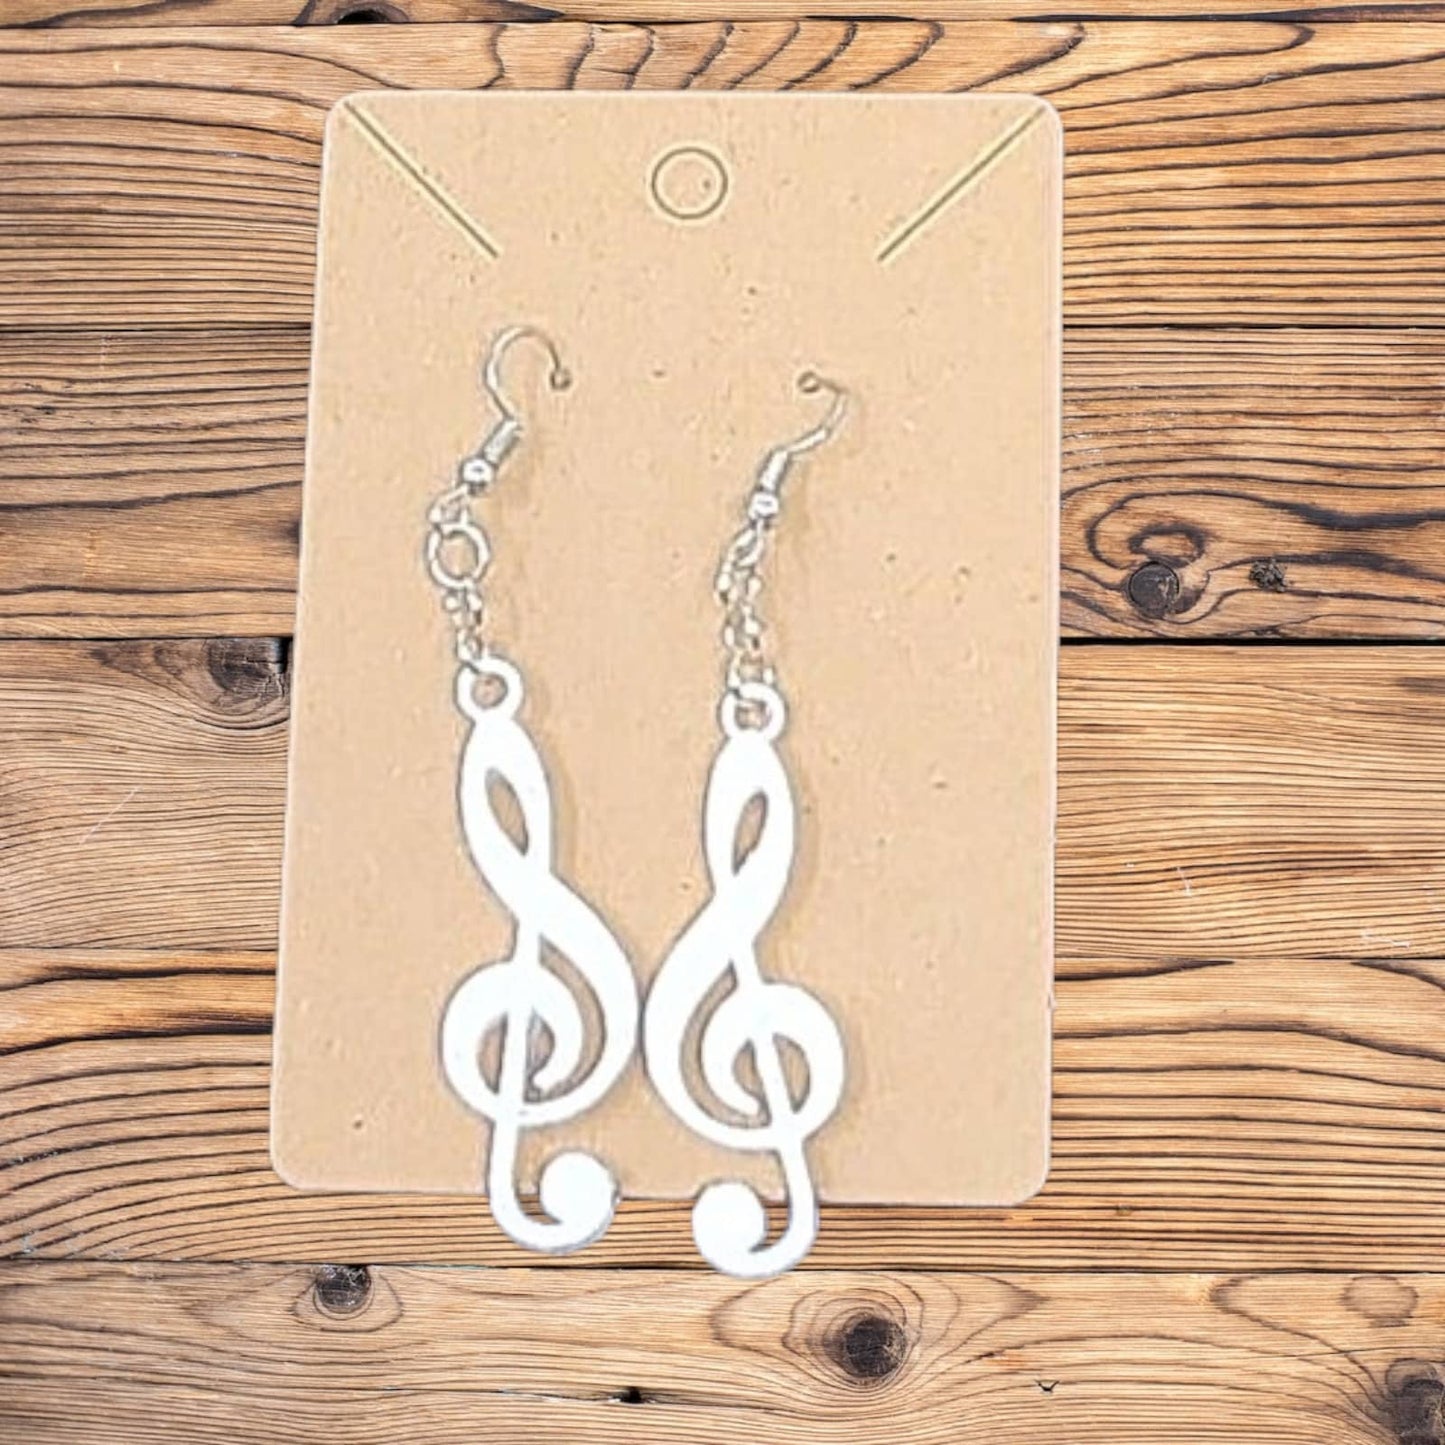 Unique Handmade Musical Note Treble Clef Earrings: Handcrafted 3D Printed Jewelry Musician Hook Earrings - Music Lover's Delight